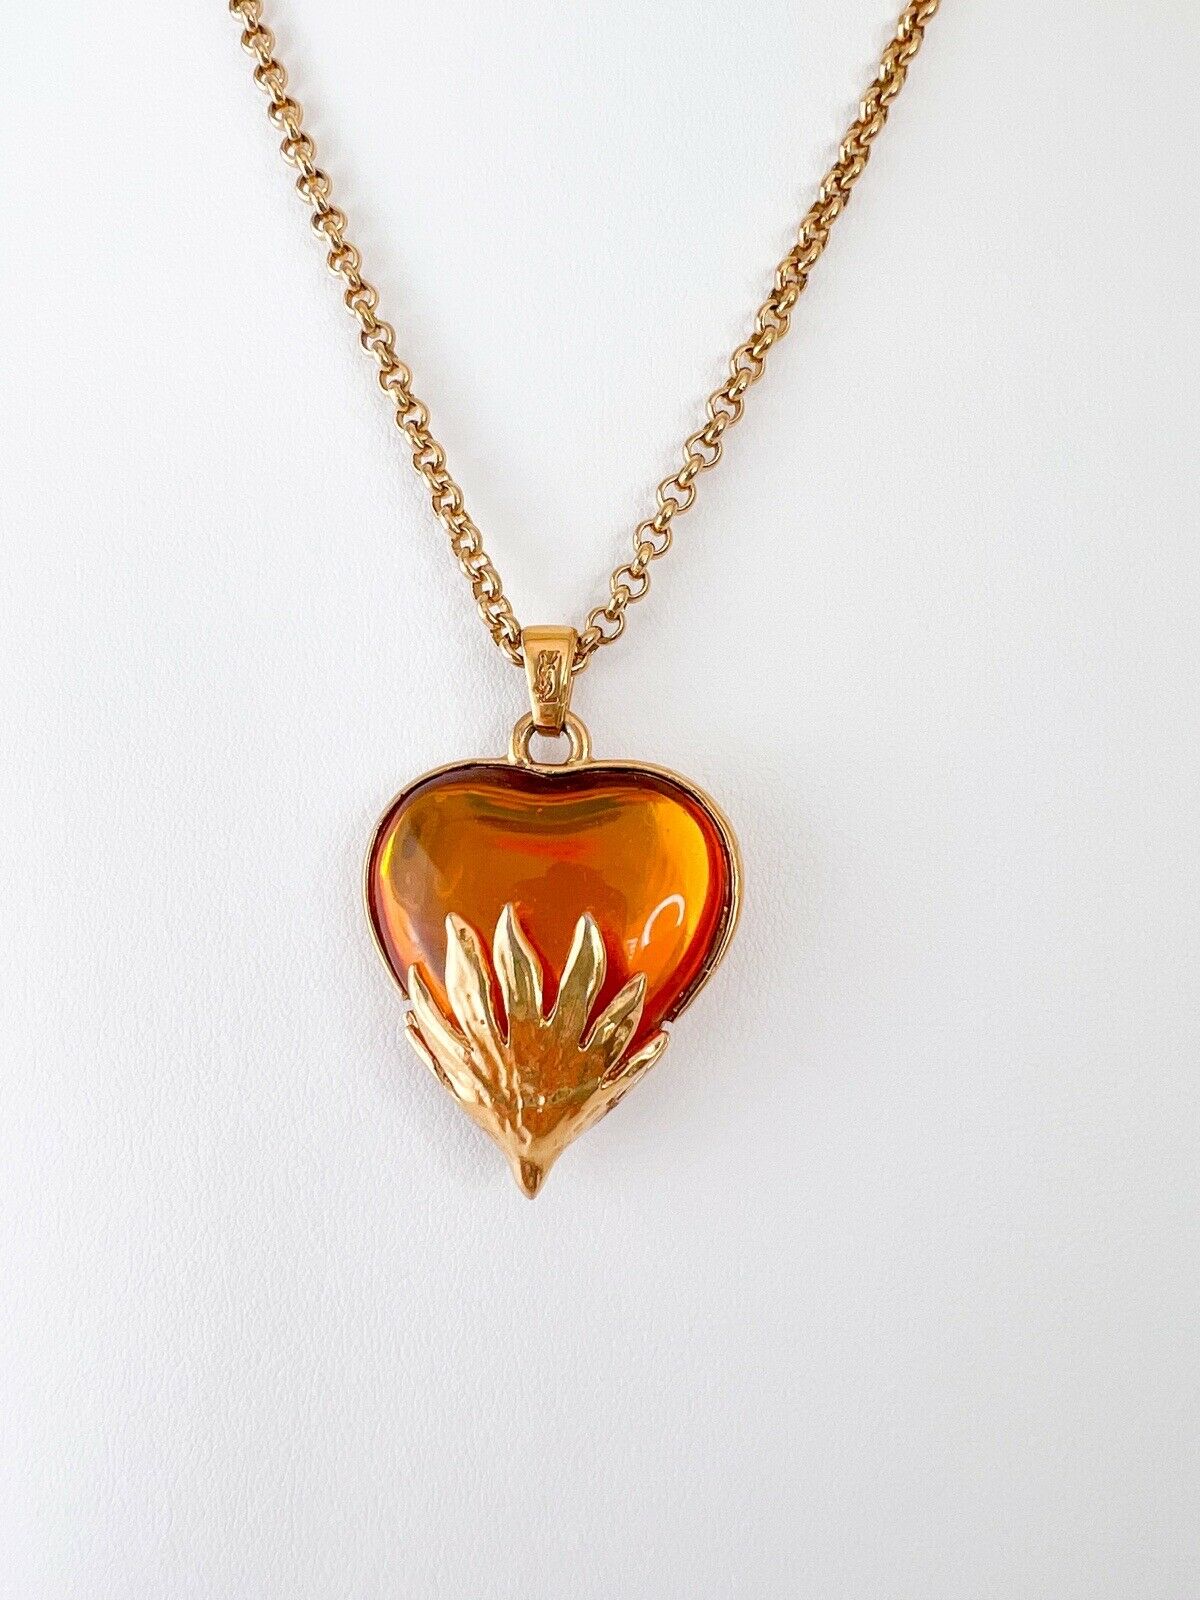 【SOLD OUT】YSL Yves Saint Laurent Vintage Gold Tone Heart Necklace Amber Cabochon